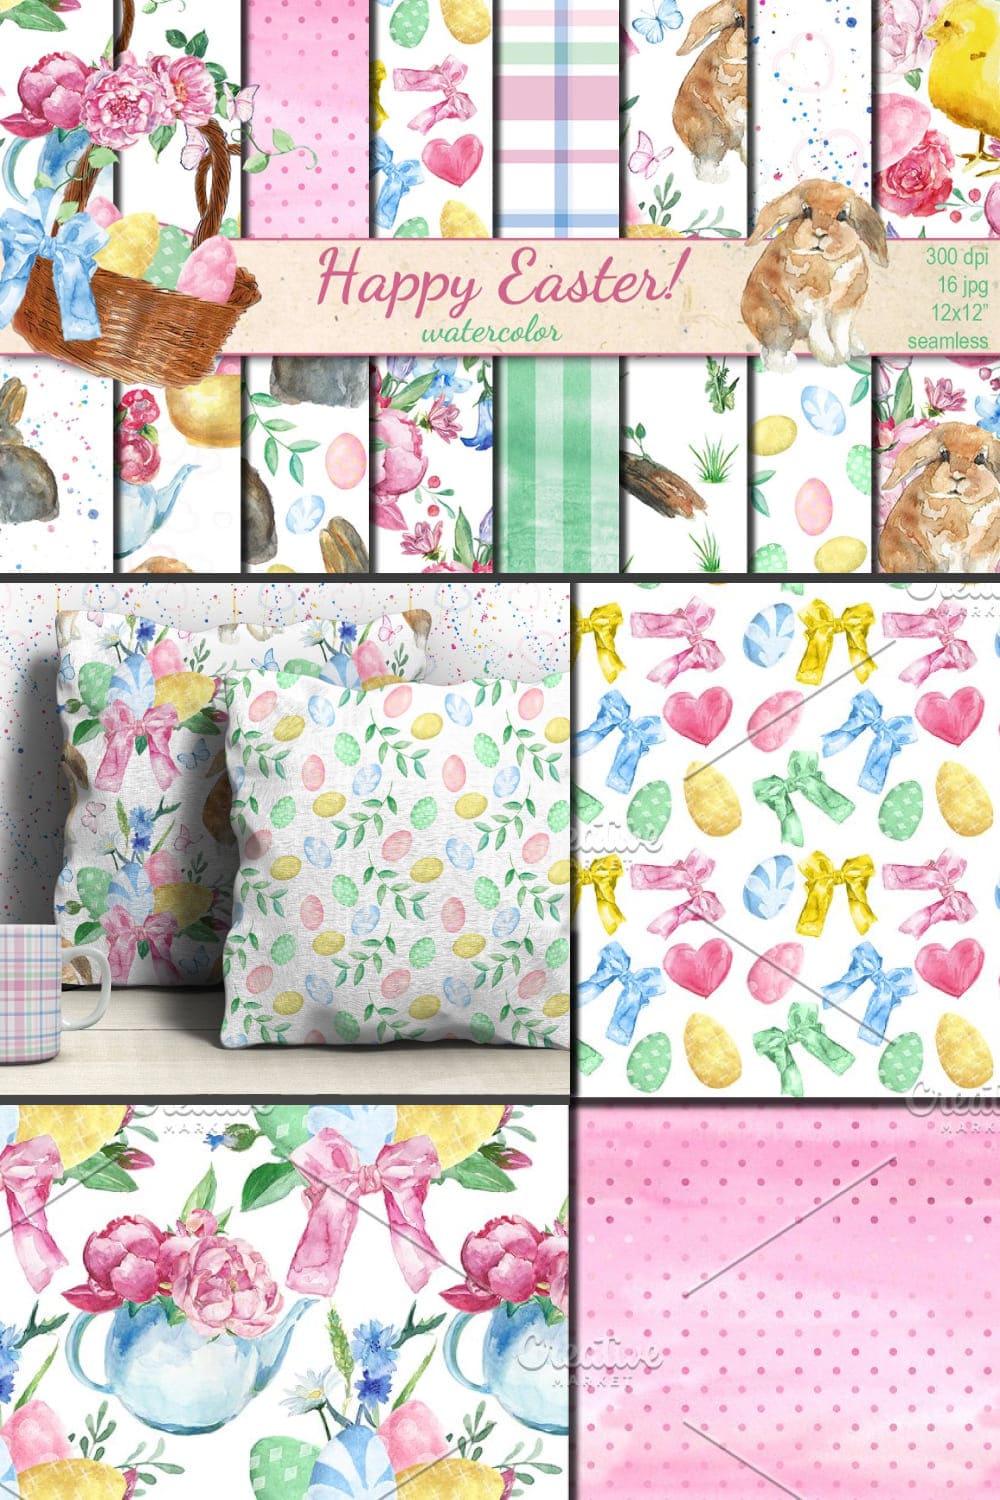 Watercolor Happy Easter Patterns - Pinterest.